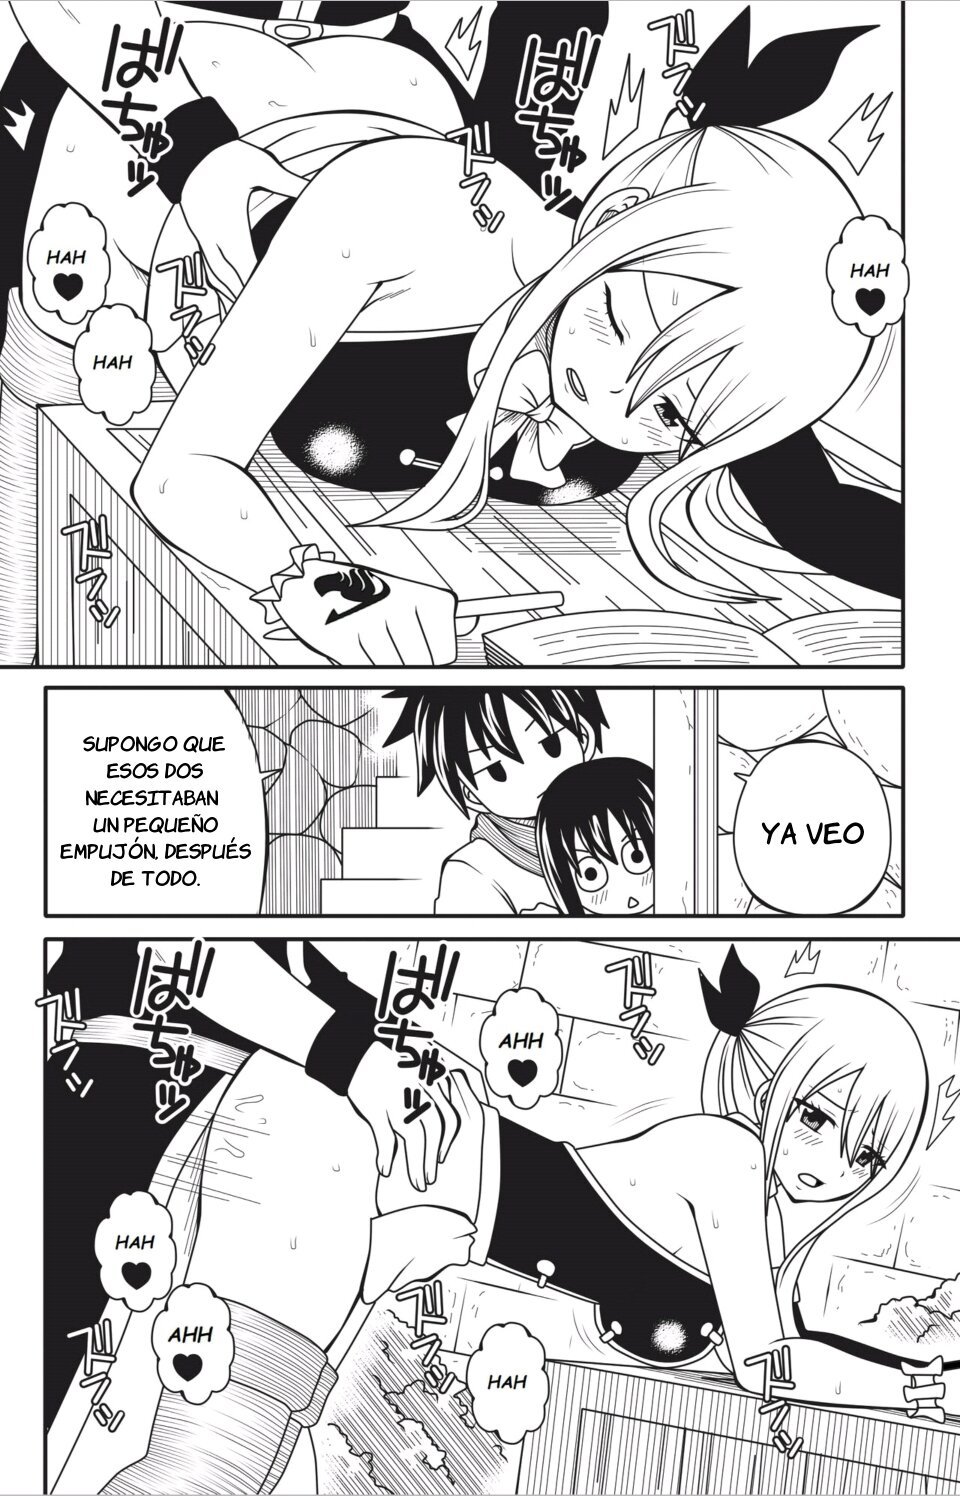 Fairy Tail H Quest Remake Omake 1 Natsu x Lucy - 1